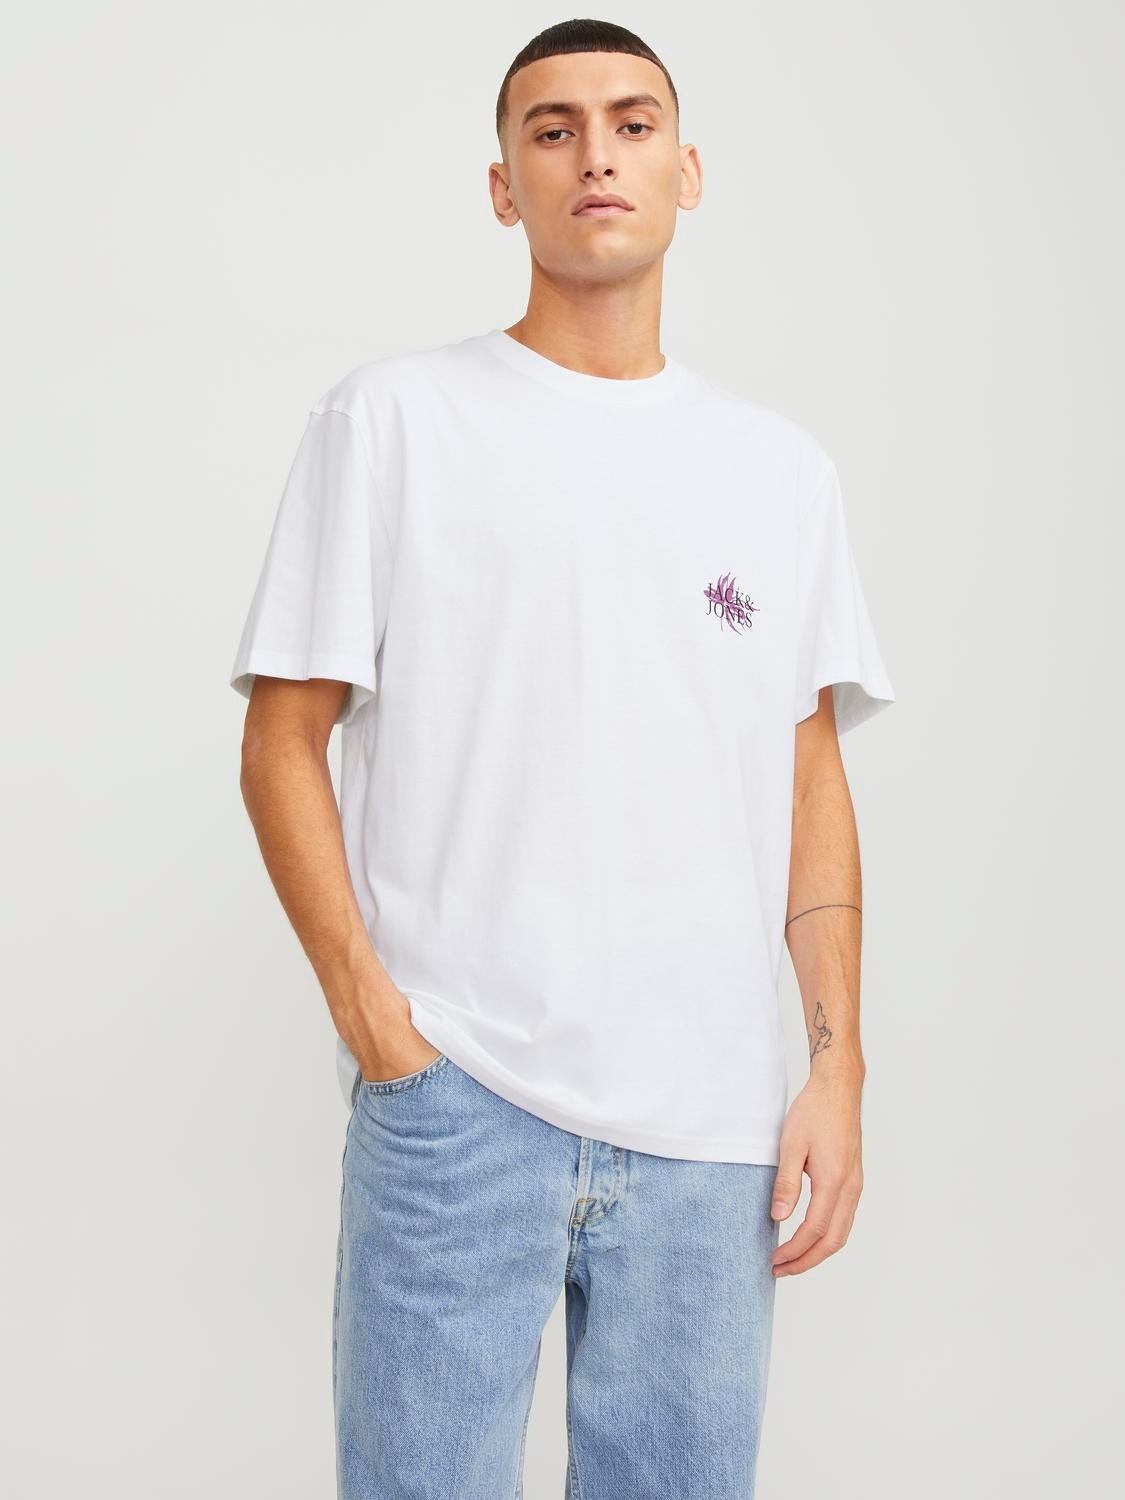 Jack & Jones Relaxed Fit Crew neck T-Shirt -Bright White - 12253602